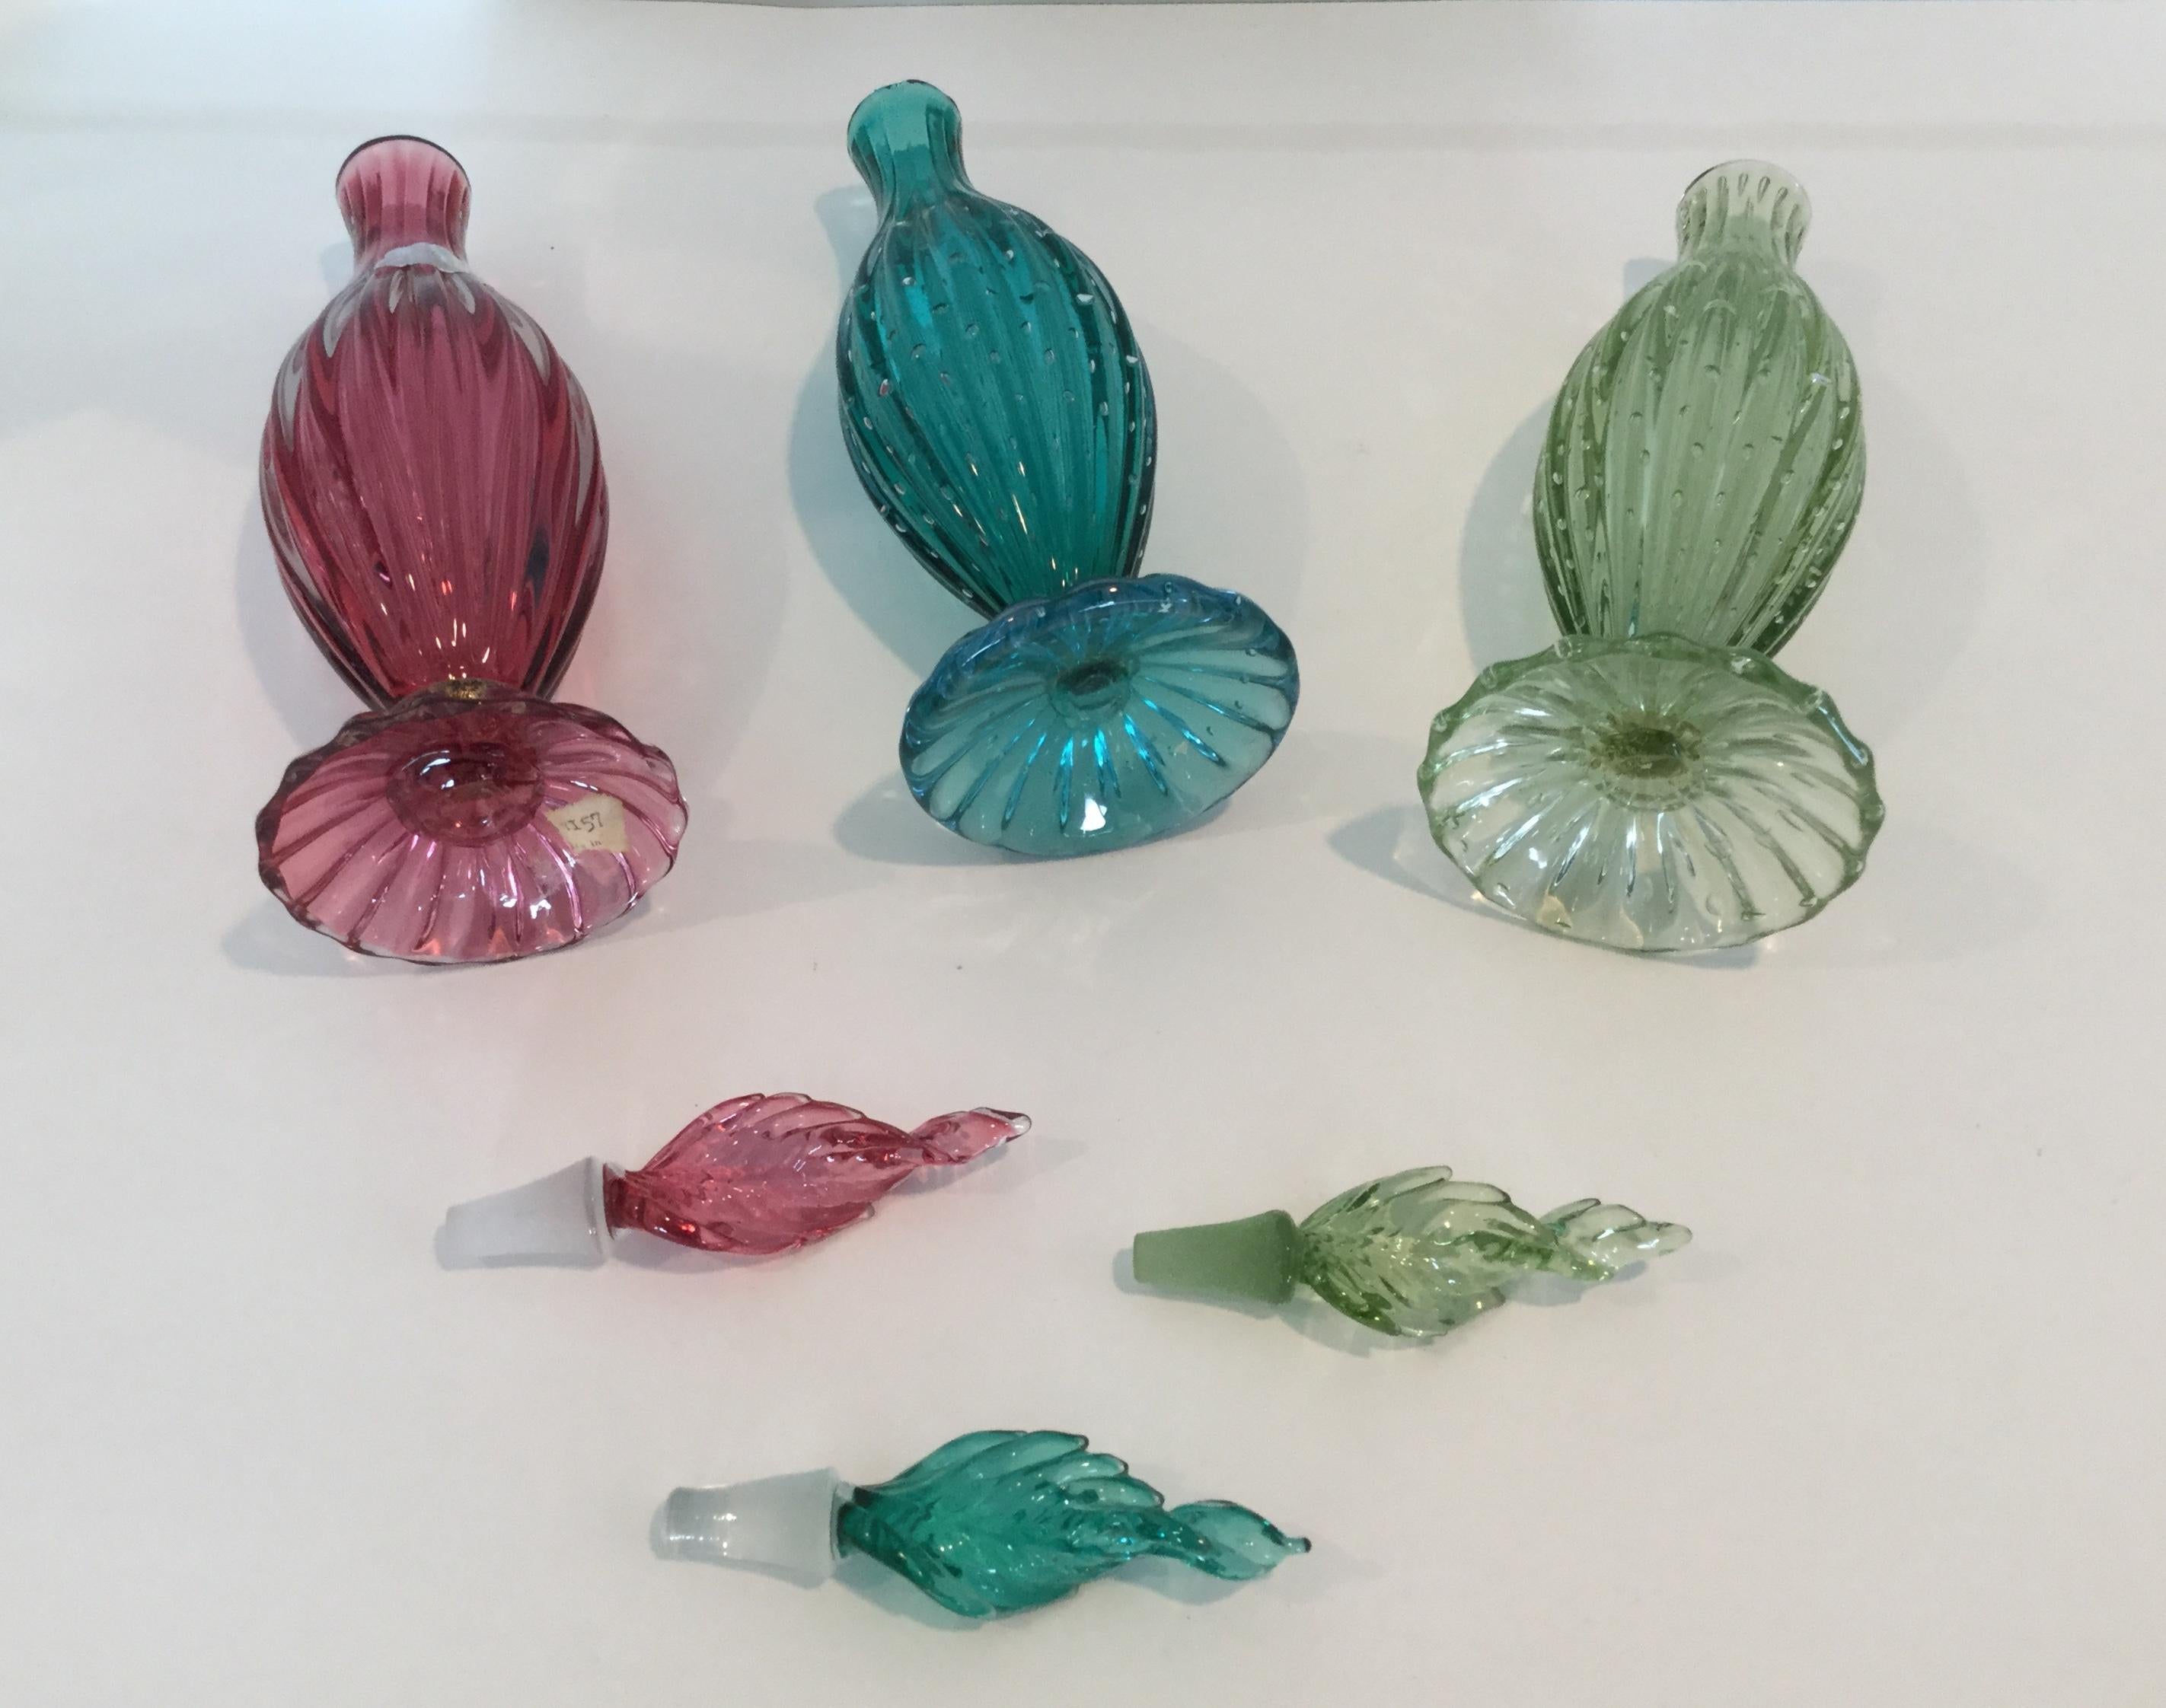 Group of 3 Murano Decanters by Alfredo Barbini In Good Condition For Sale In Keego Harbor, MI